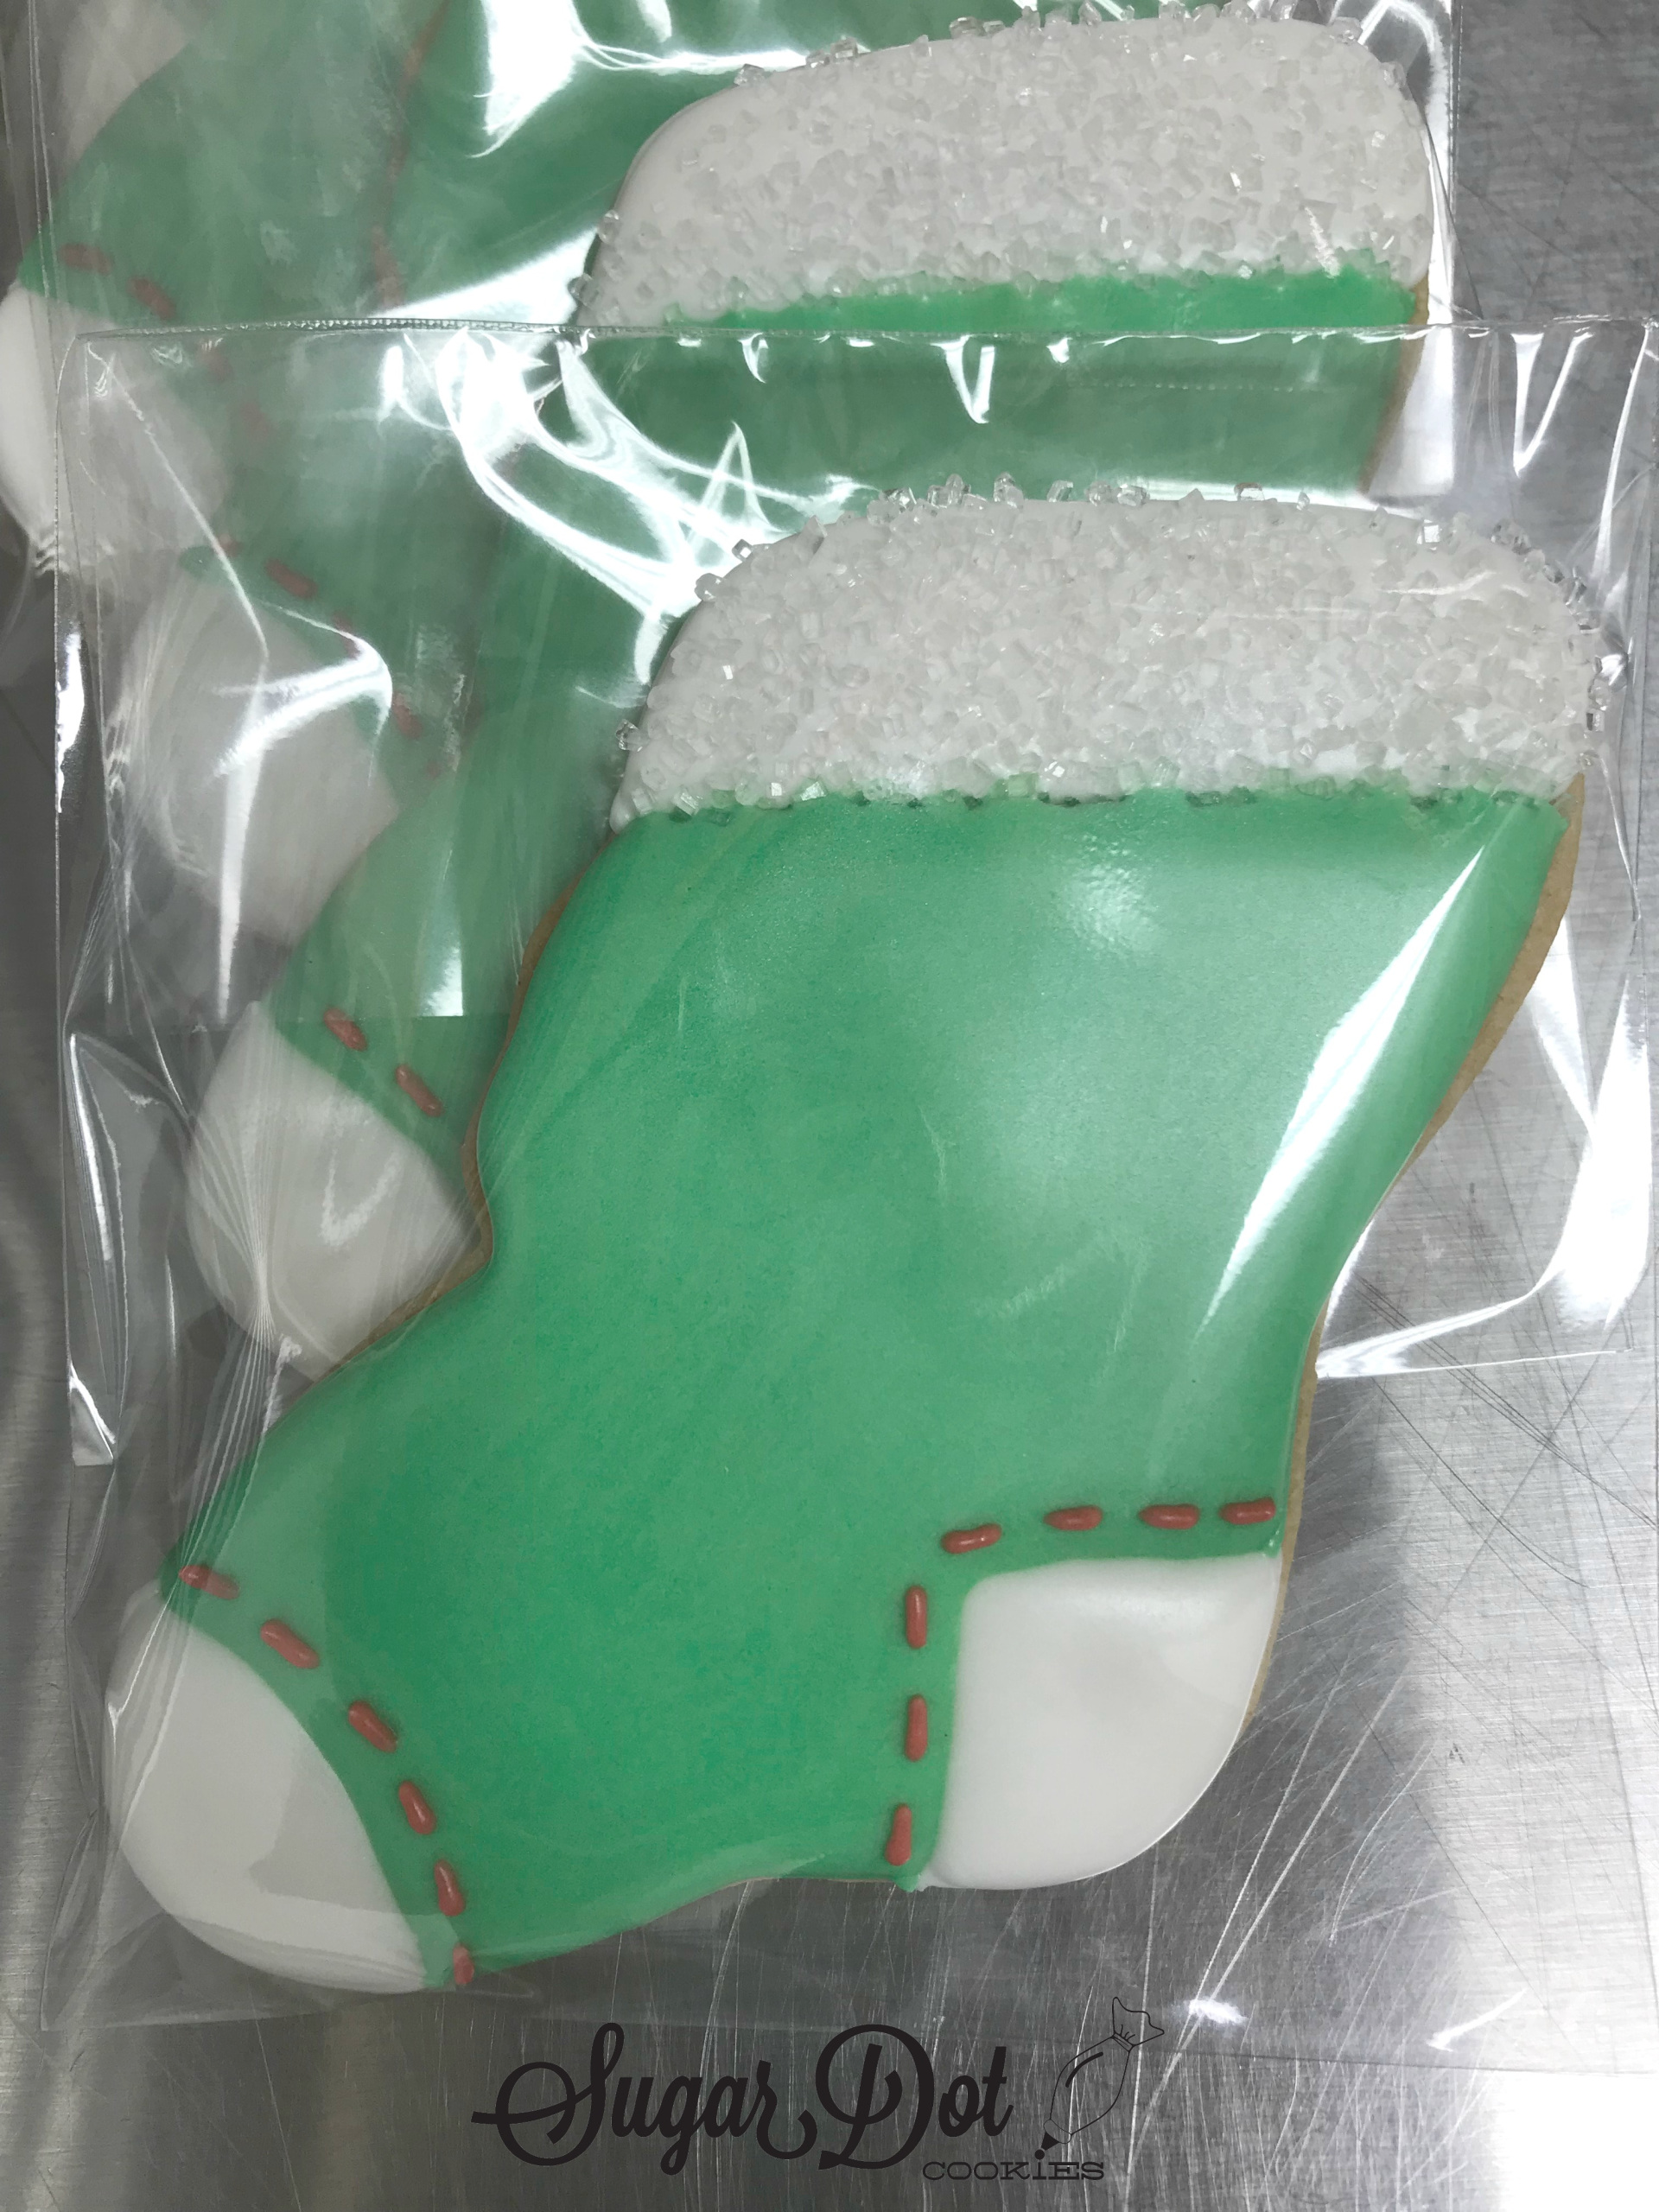 Mini and Small Icing Scrapers - cookie decorating supply for pick up in  Frederick, Maryland or shipping.